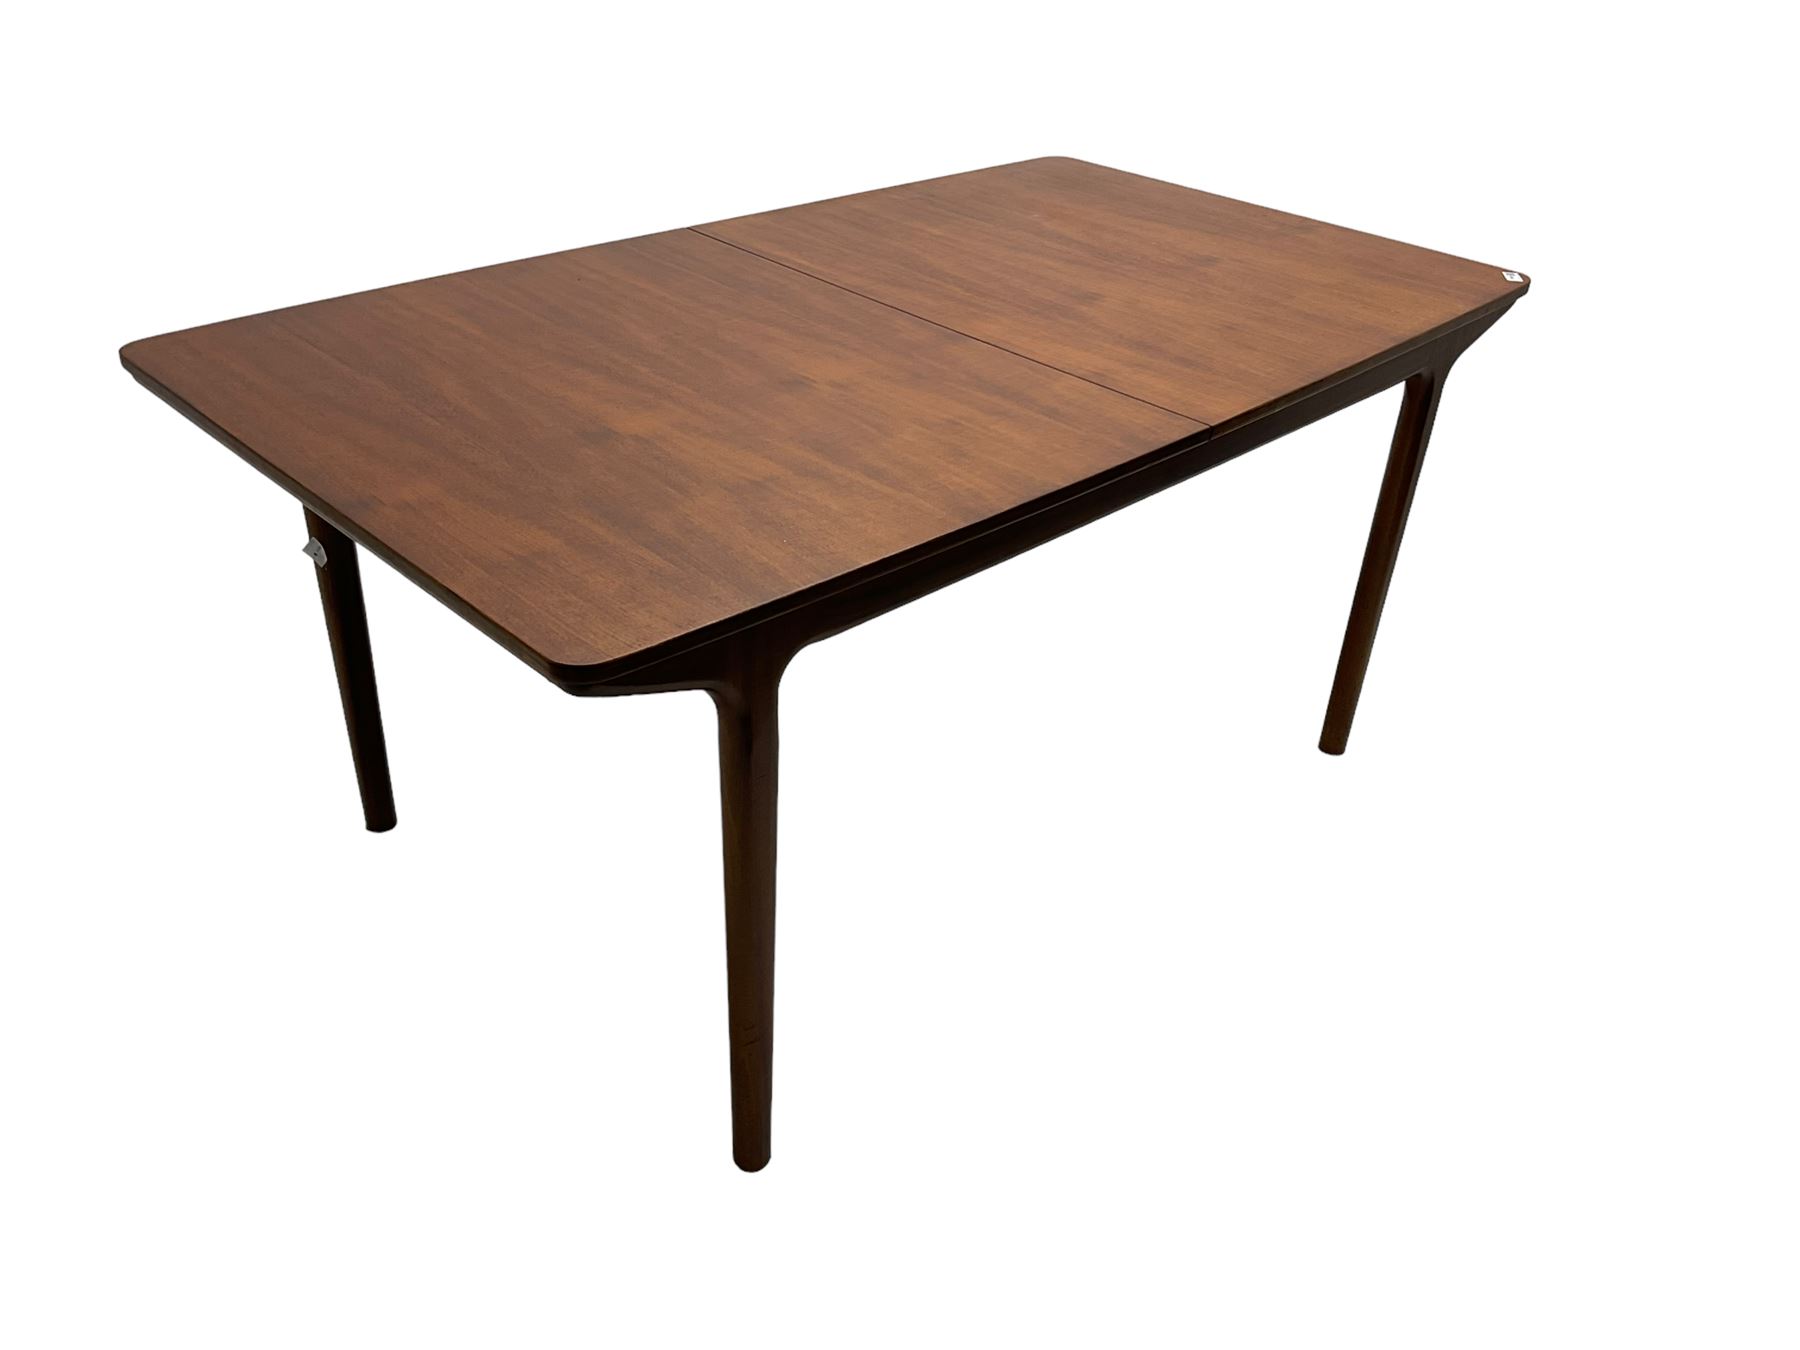 Tom Robertson for AH McIntosh & Co of Kirkaldy - mid-20th century teak extending dining table - Image 4 of 10